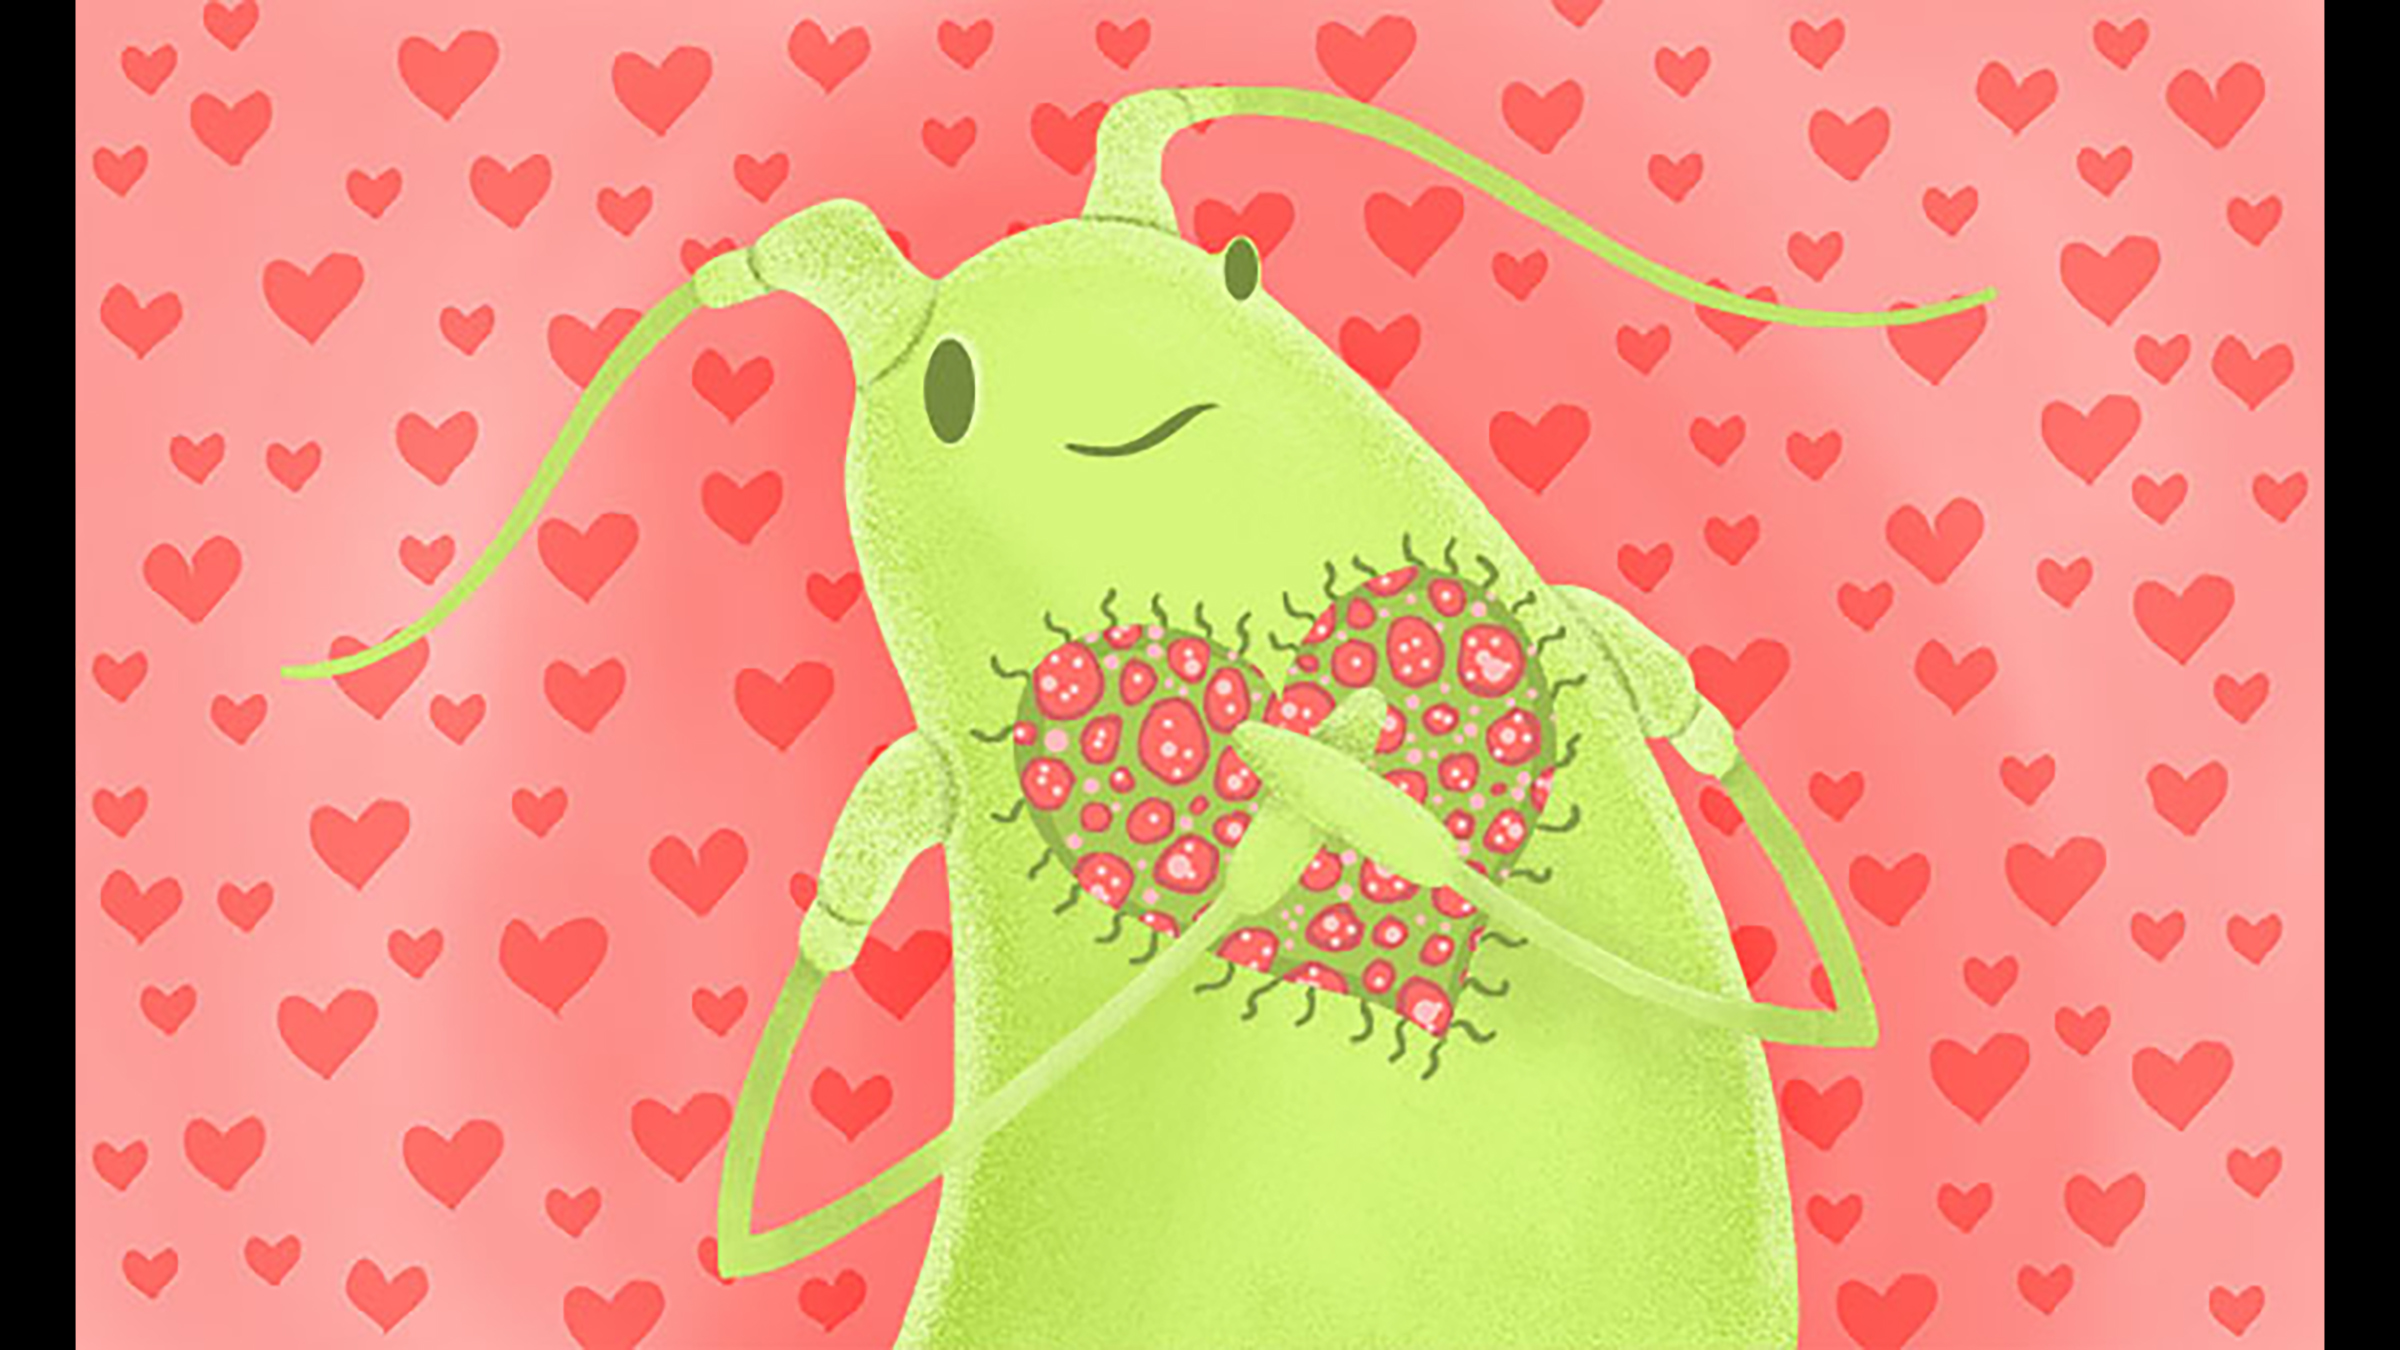 A green insect holds its hands over its heart, which is made up of red microbes